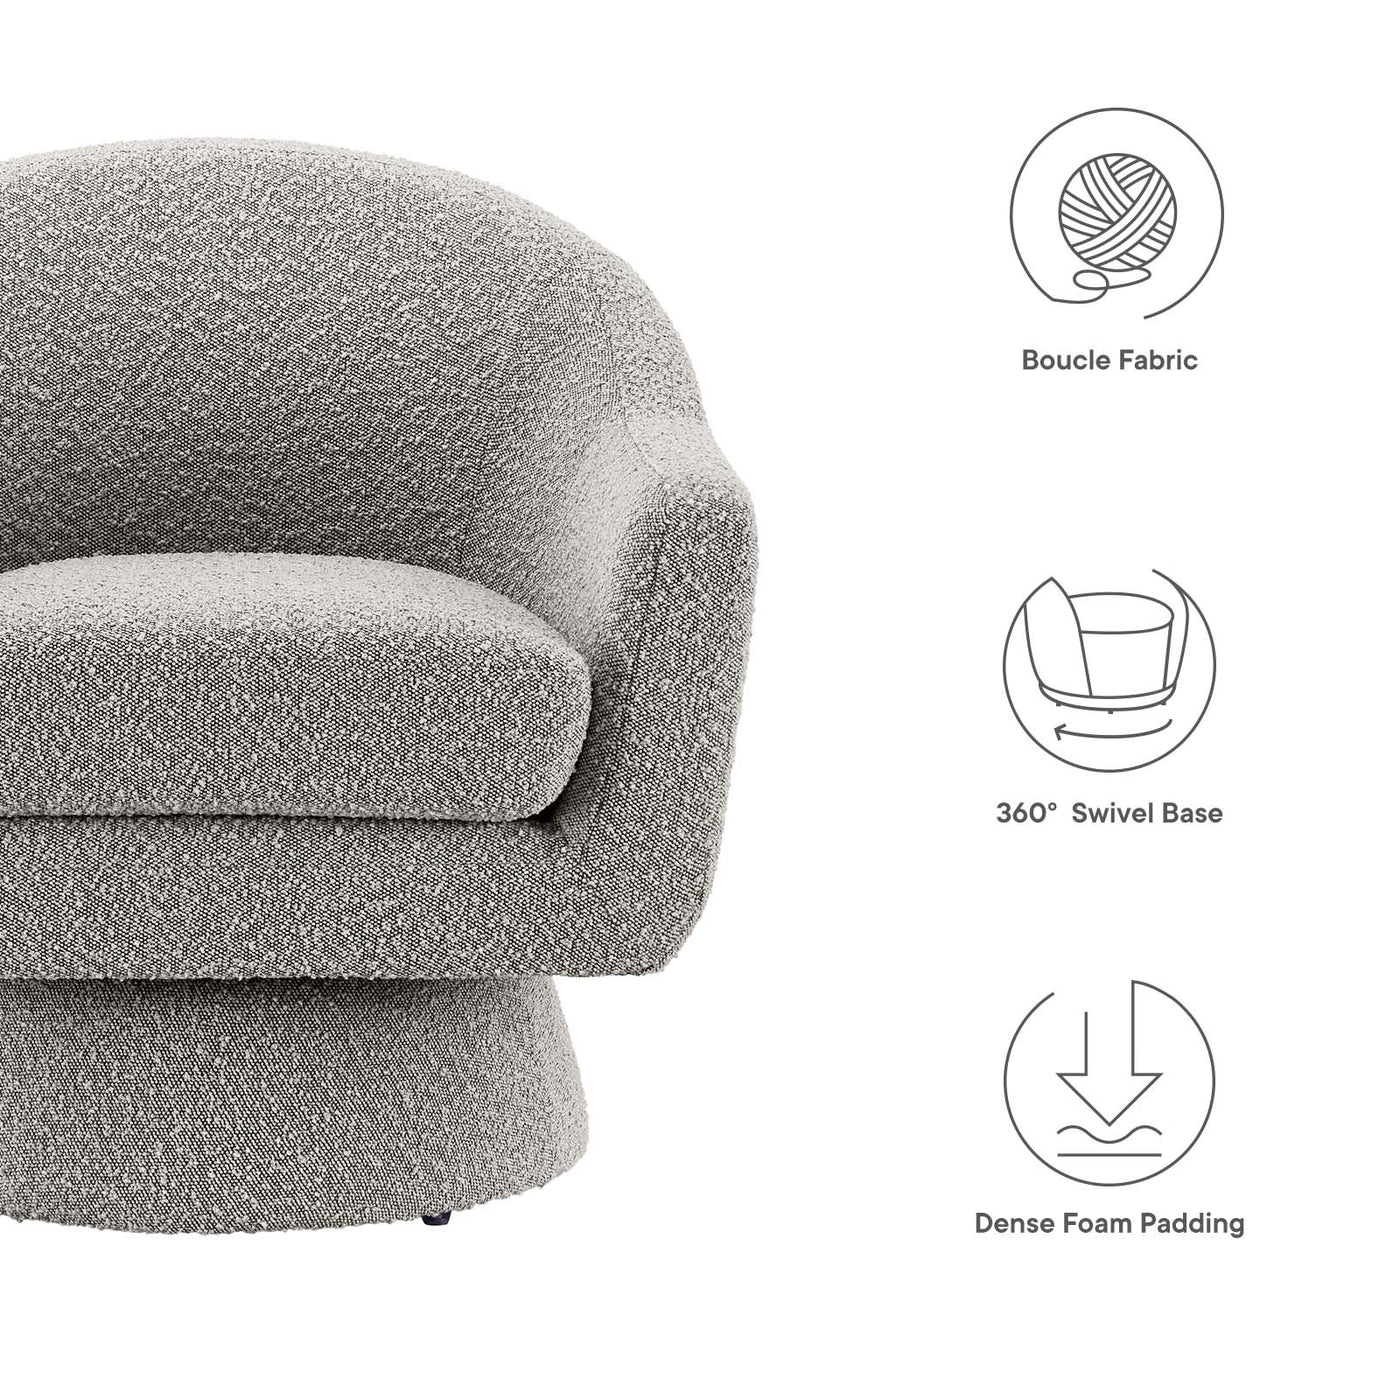 Astral Boucle Fabric Swivel Chair